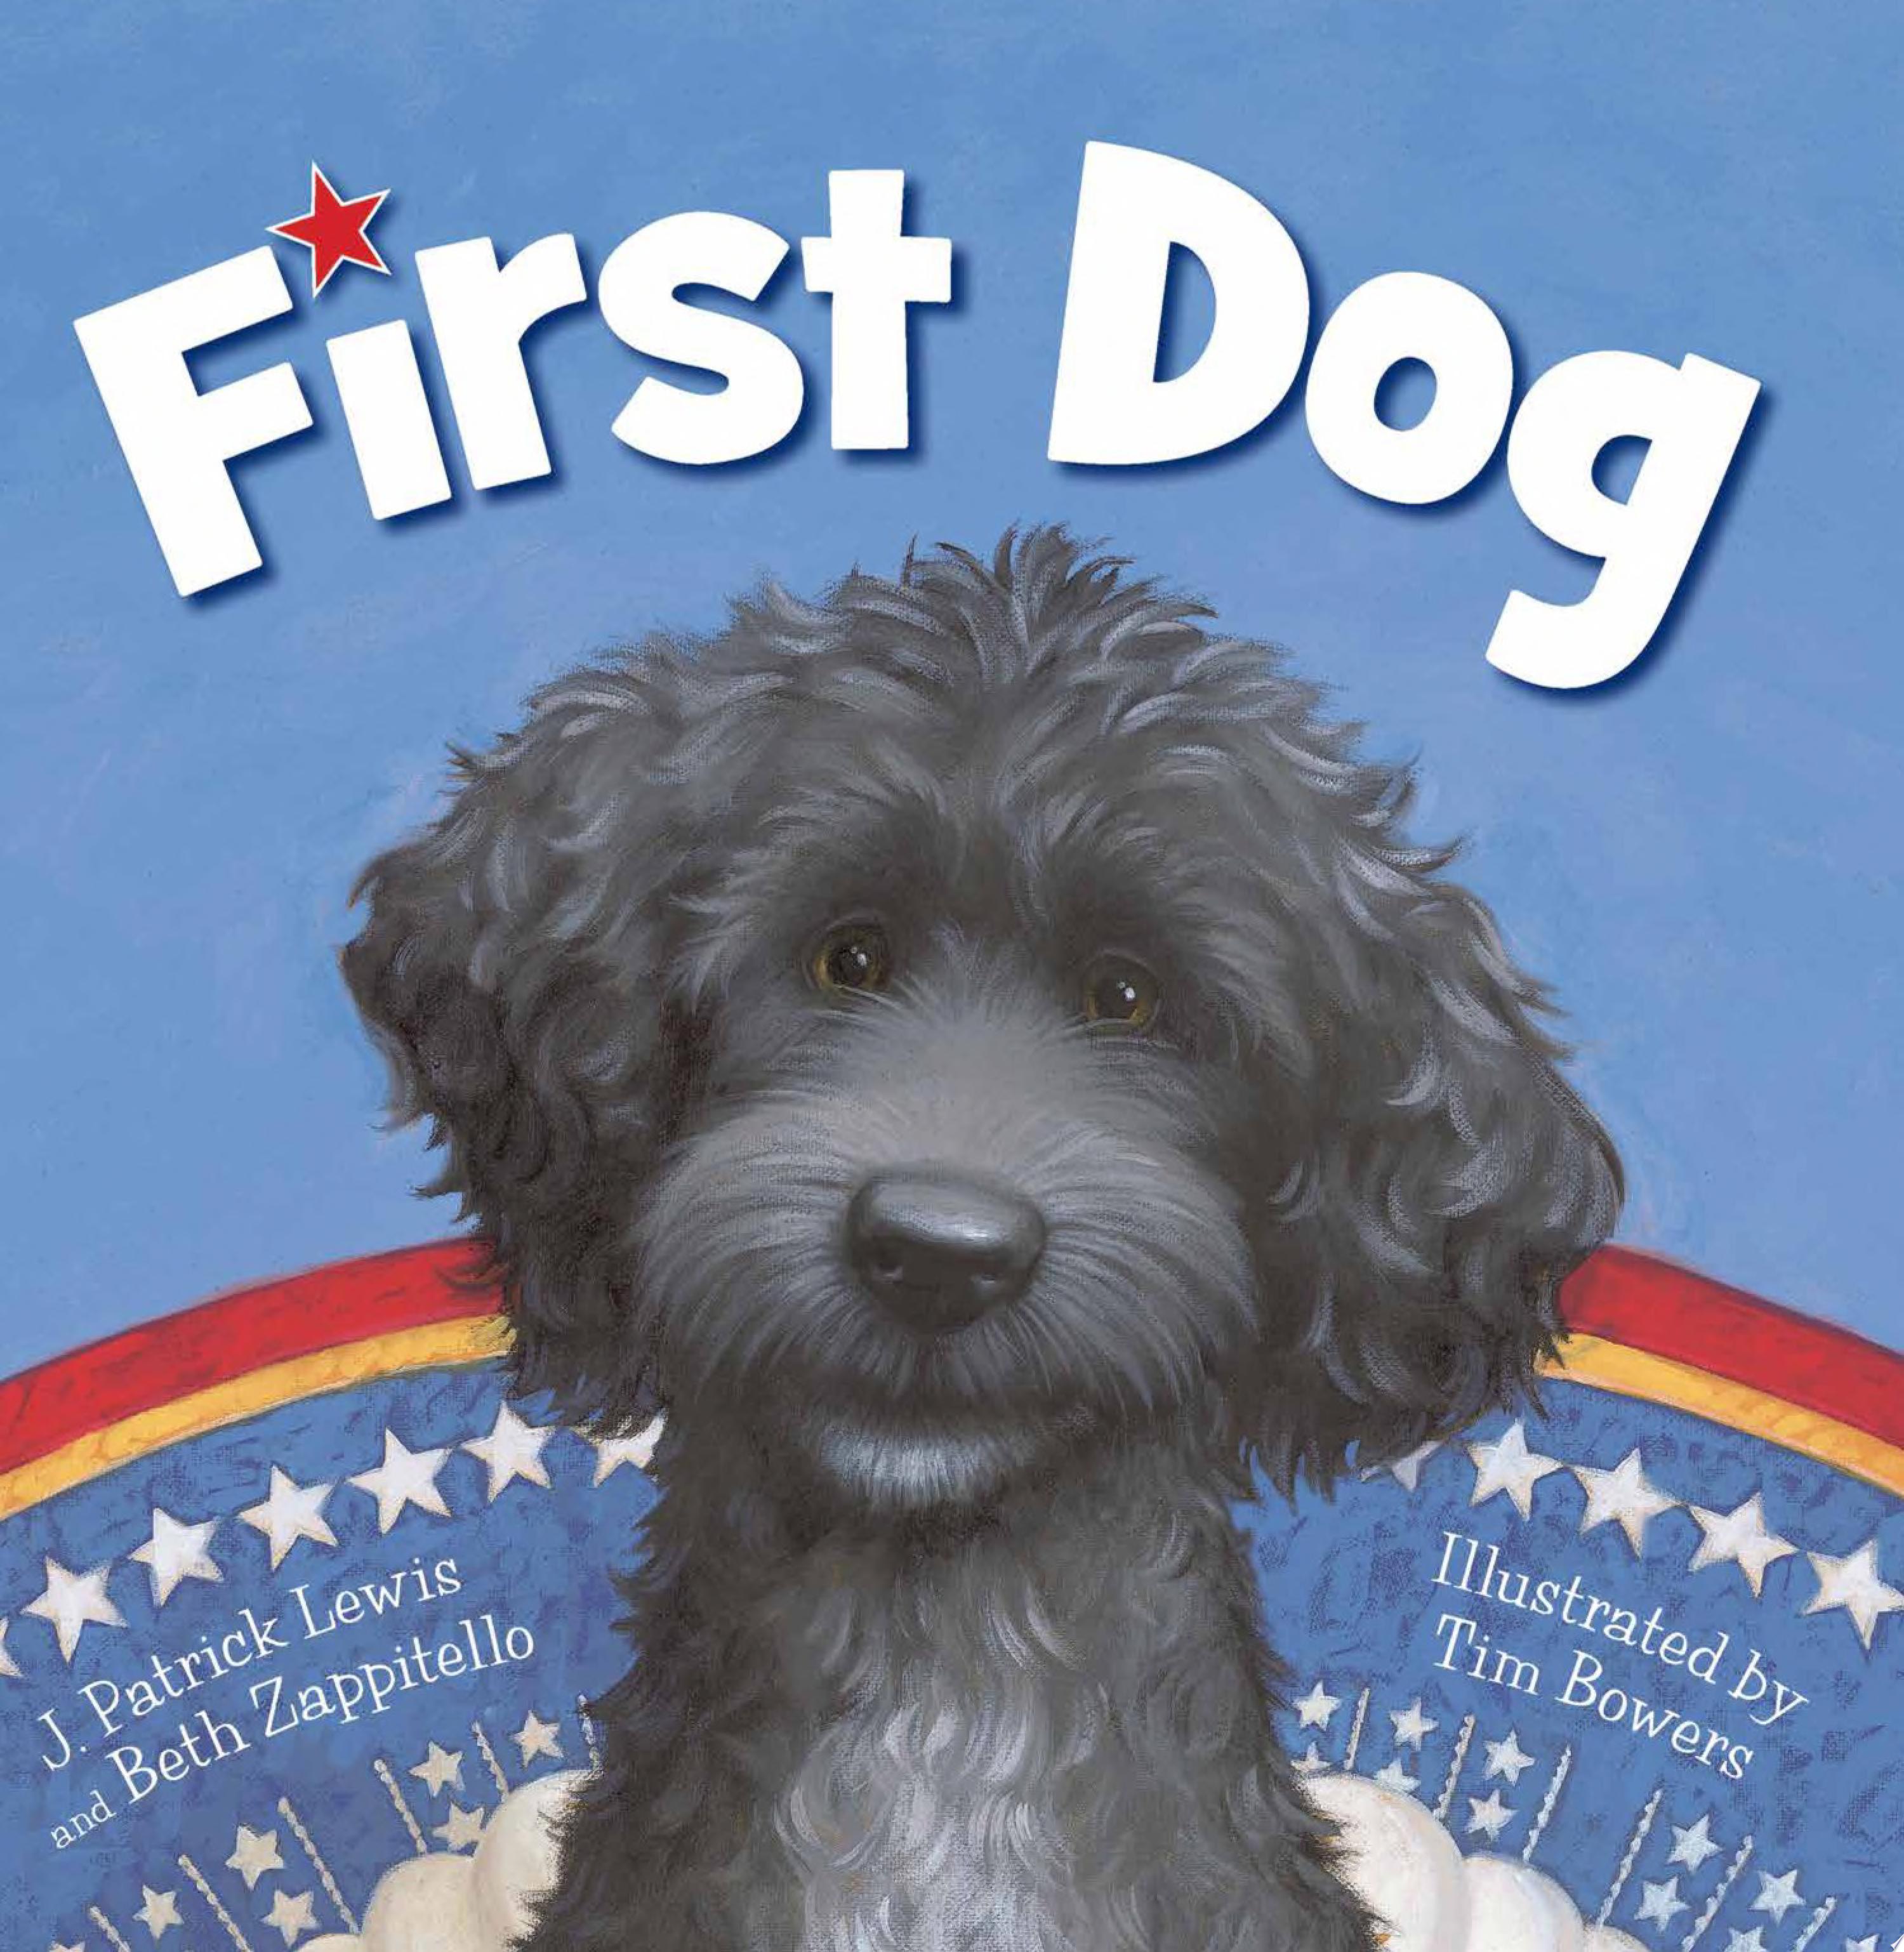 Image for "First Dog"